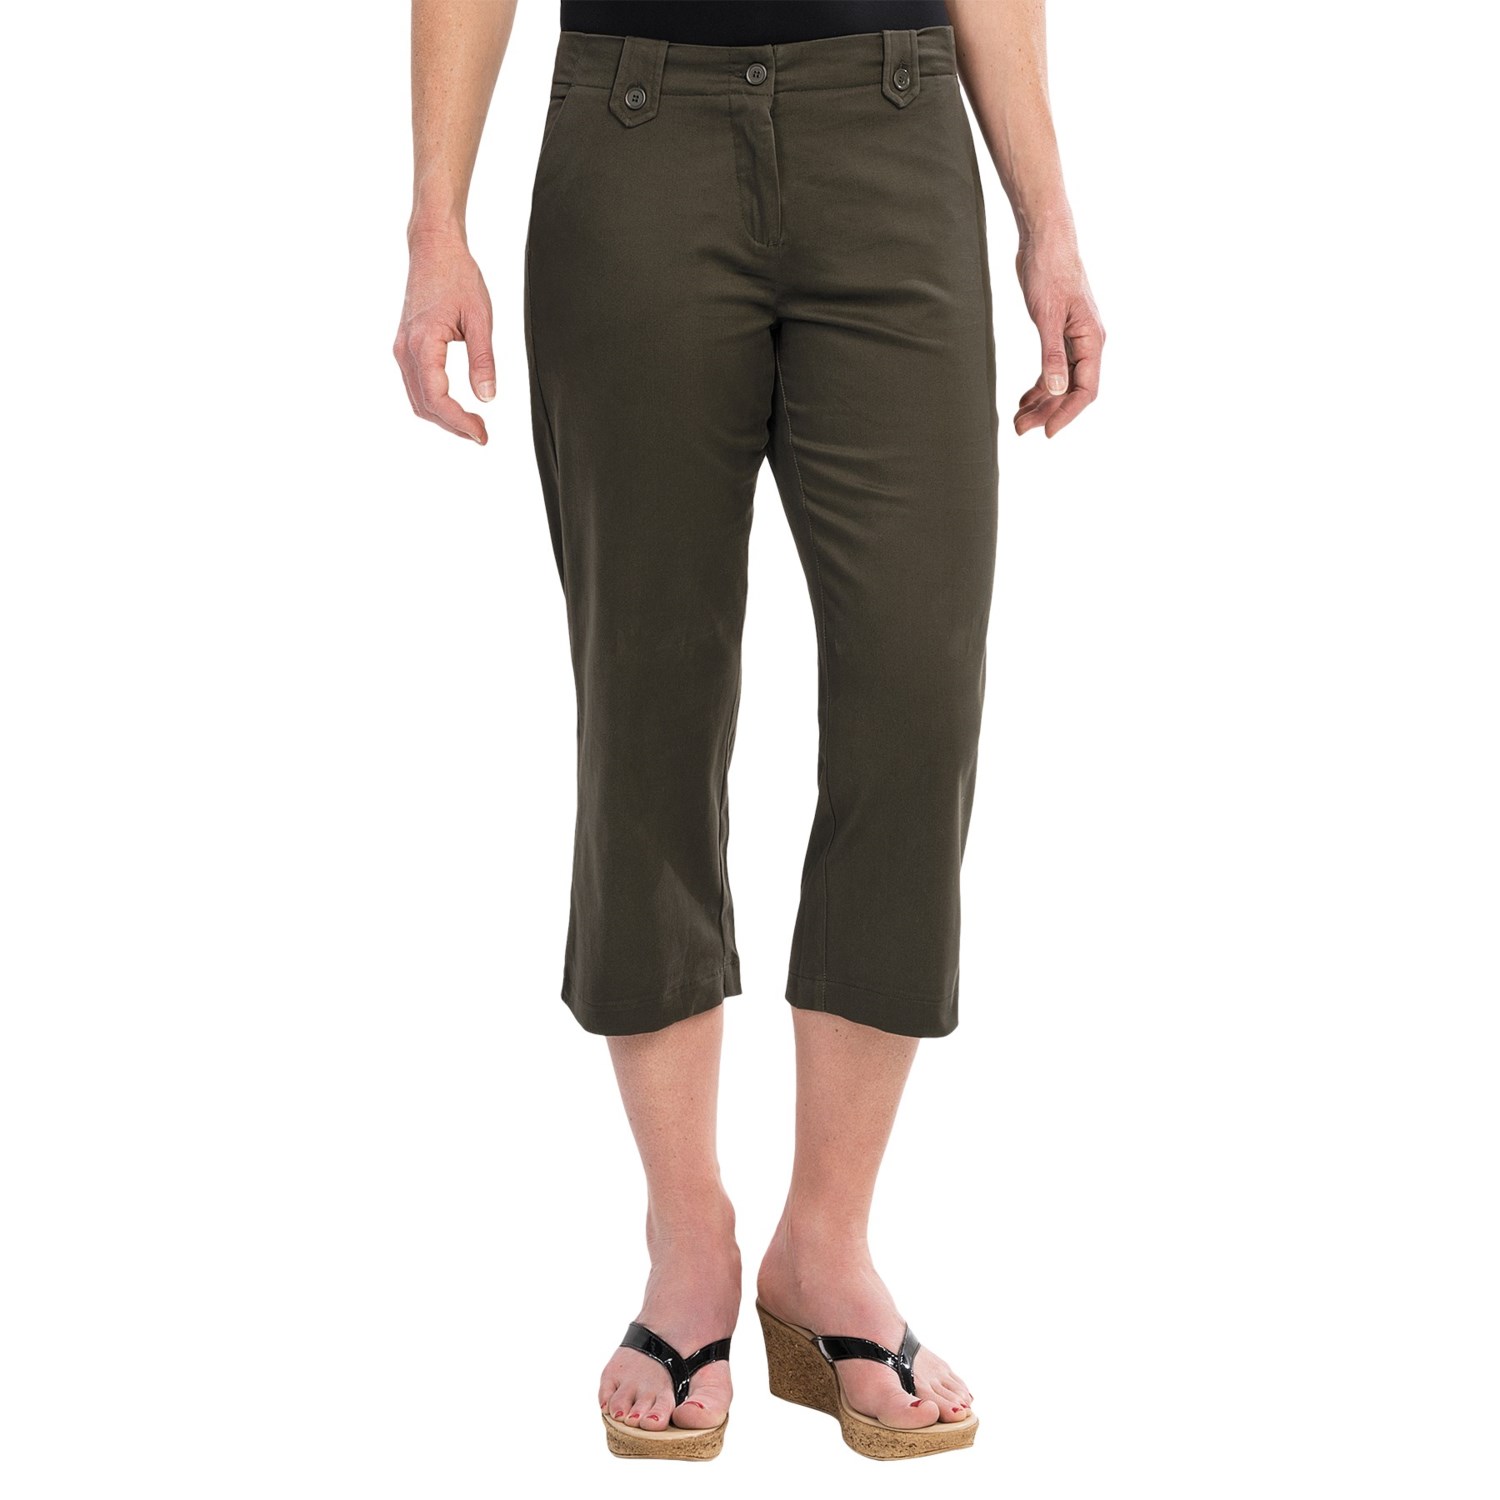 Stretch Twill Capris with Button-Flap Back Pockets (For Women) 7362H ...